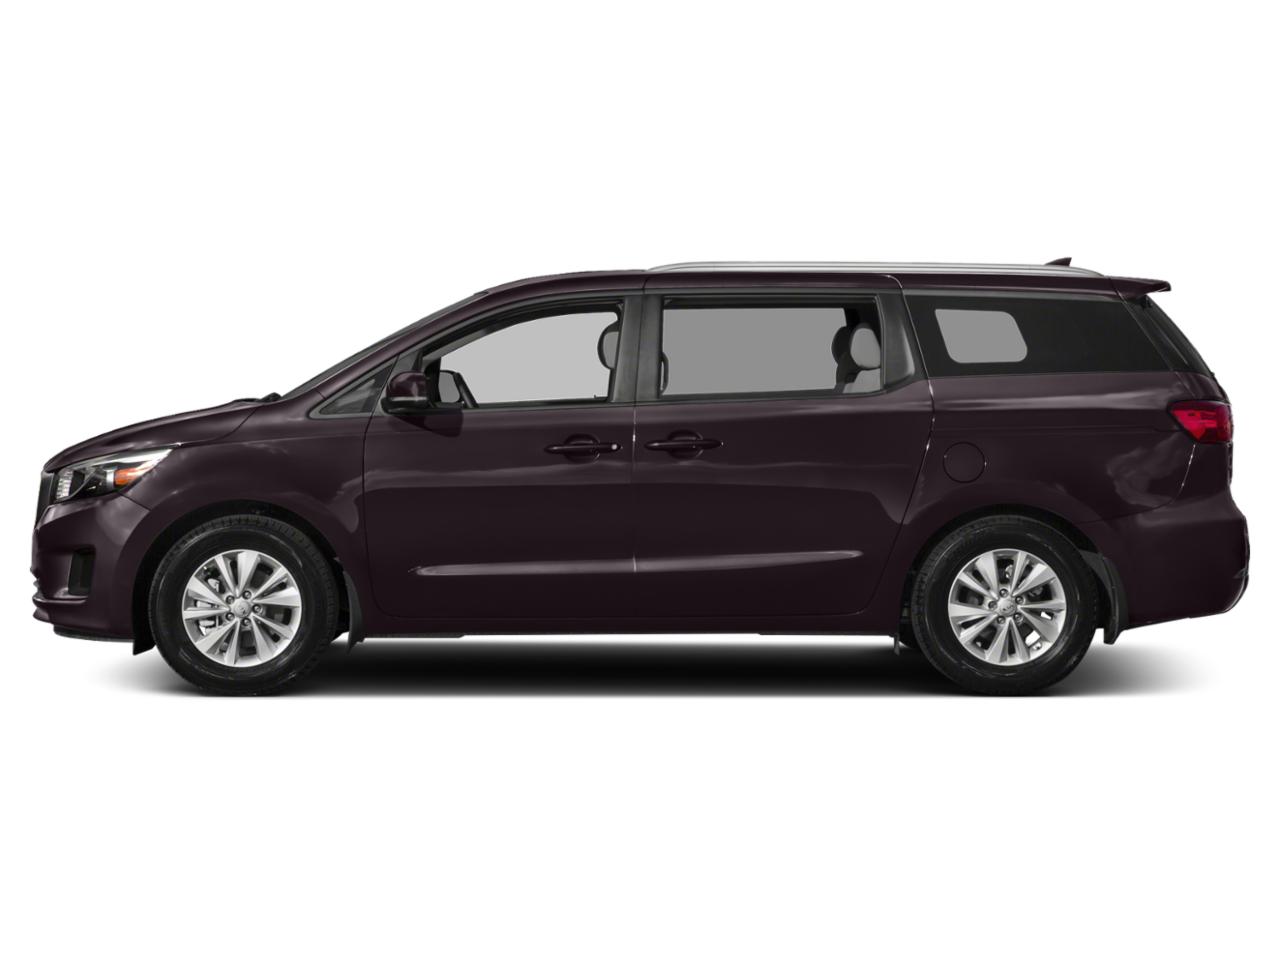 Used 2015 Kia Sedona EX with VIN KNDMC5C19F6020909 for sale in Wexford, PA